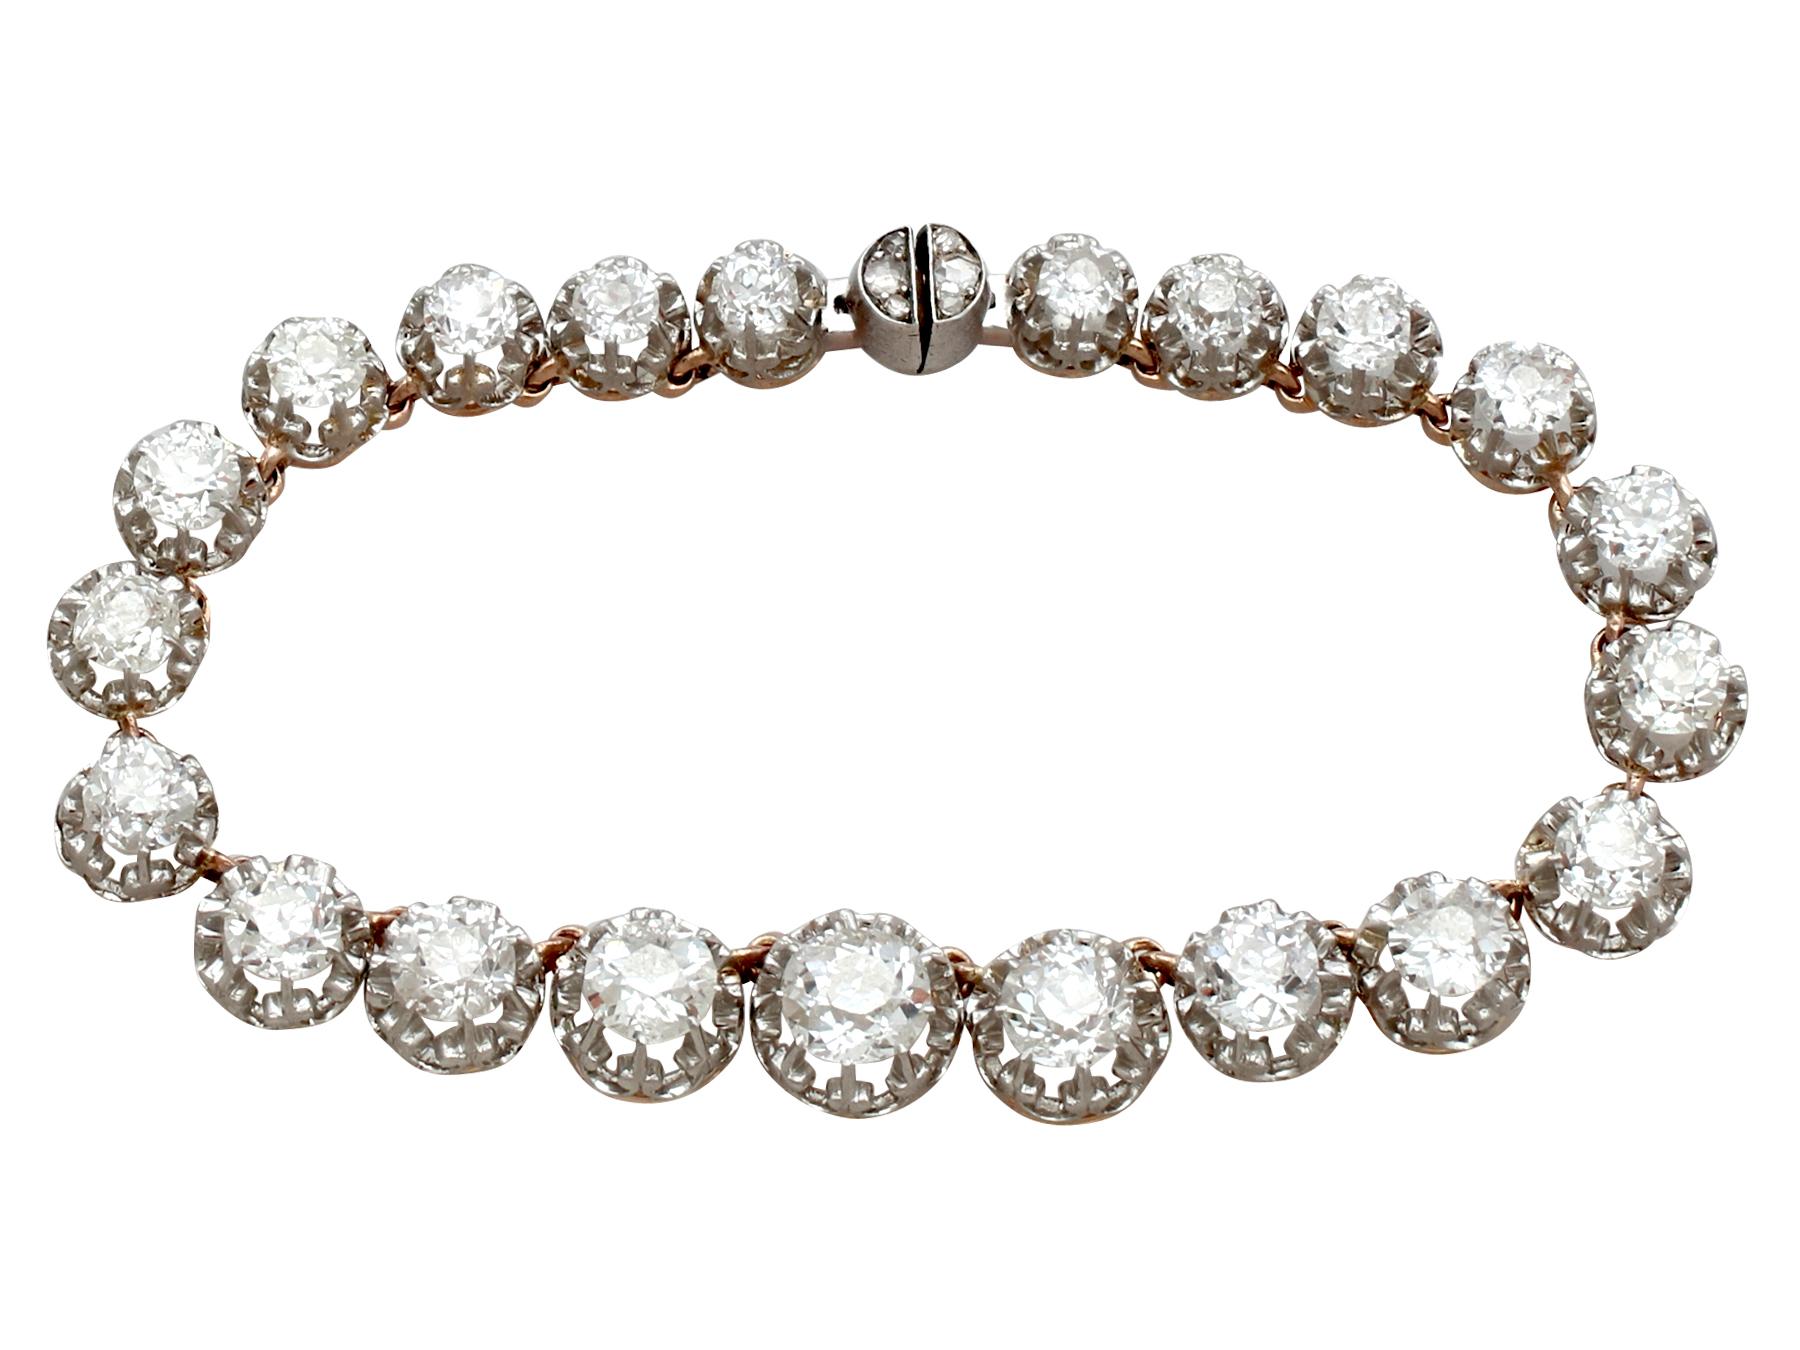 A stunning antique French 11.12 carat diamond and 14 carat yellow gold, platinum set bracelet / necklace; part of our diverse antique jewellery and estate jewelry collections.

This stunning, fine and impressive diamond bracelet has been crafted in